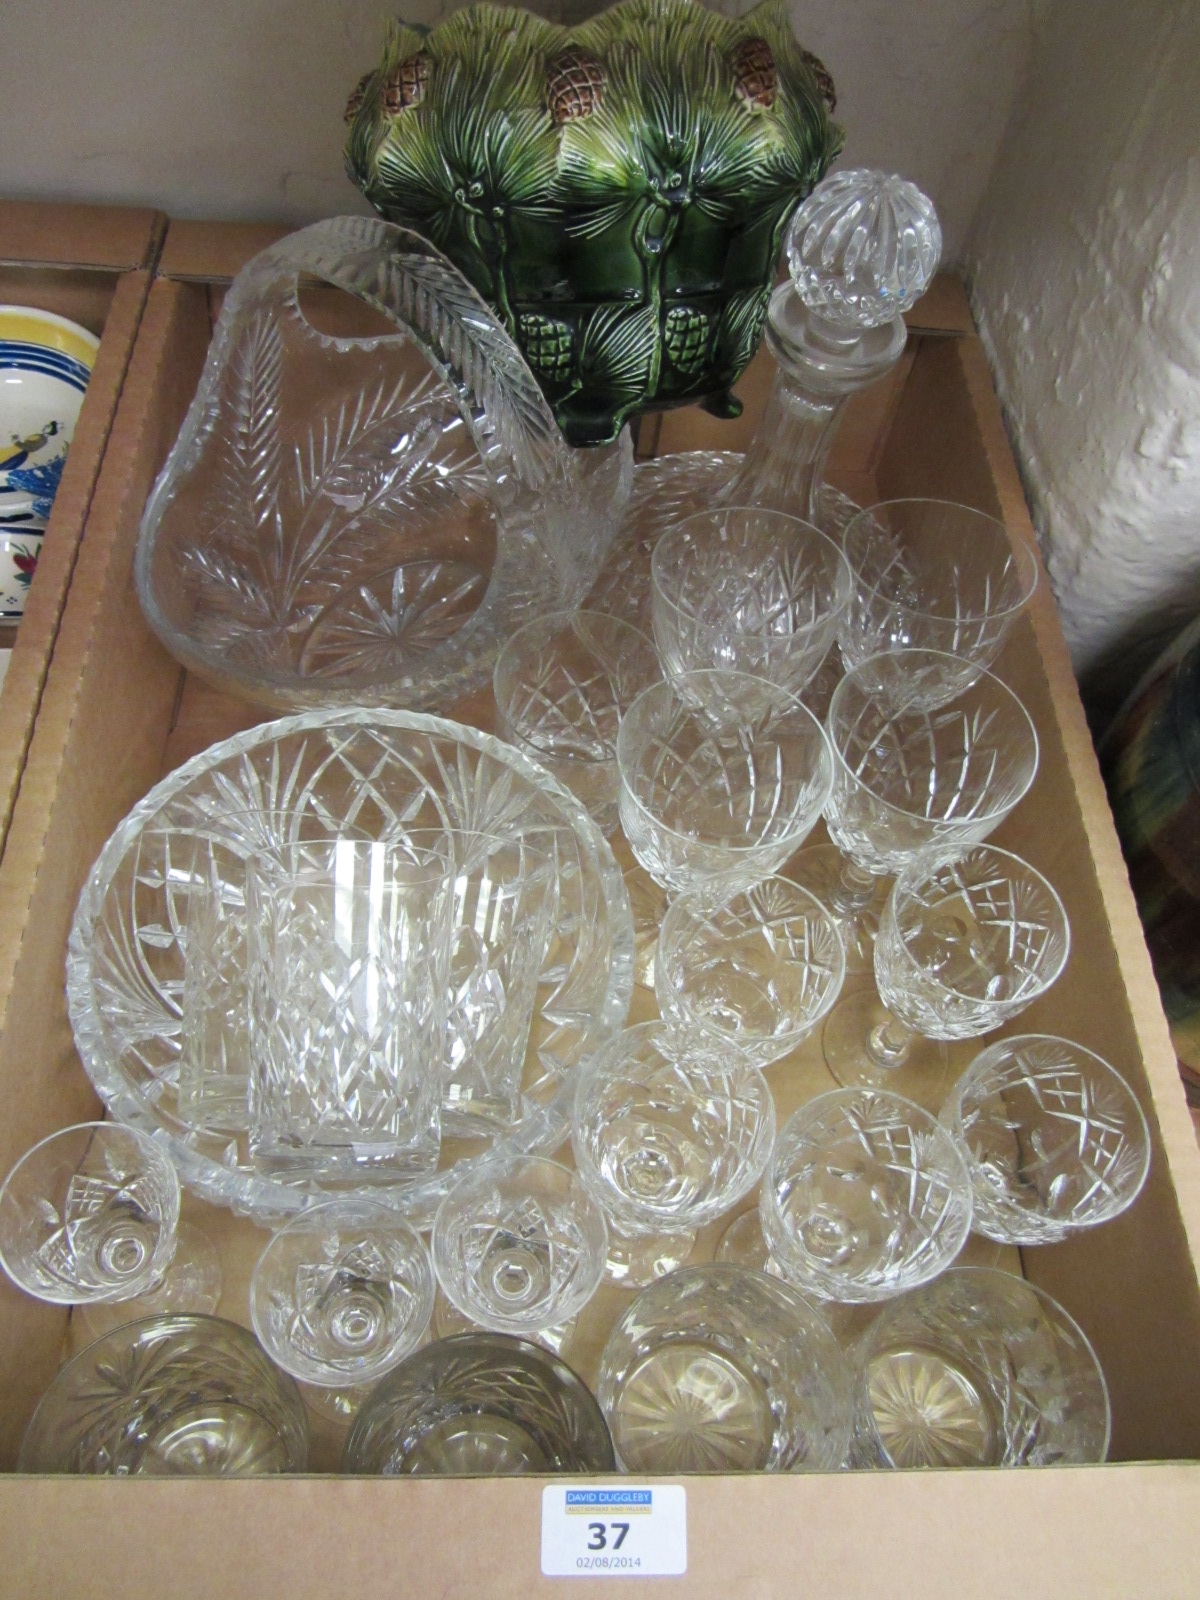 Ships decanter, large basket and other cut crystal glassware in one box